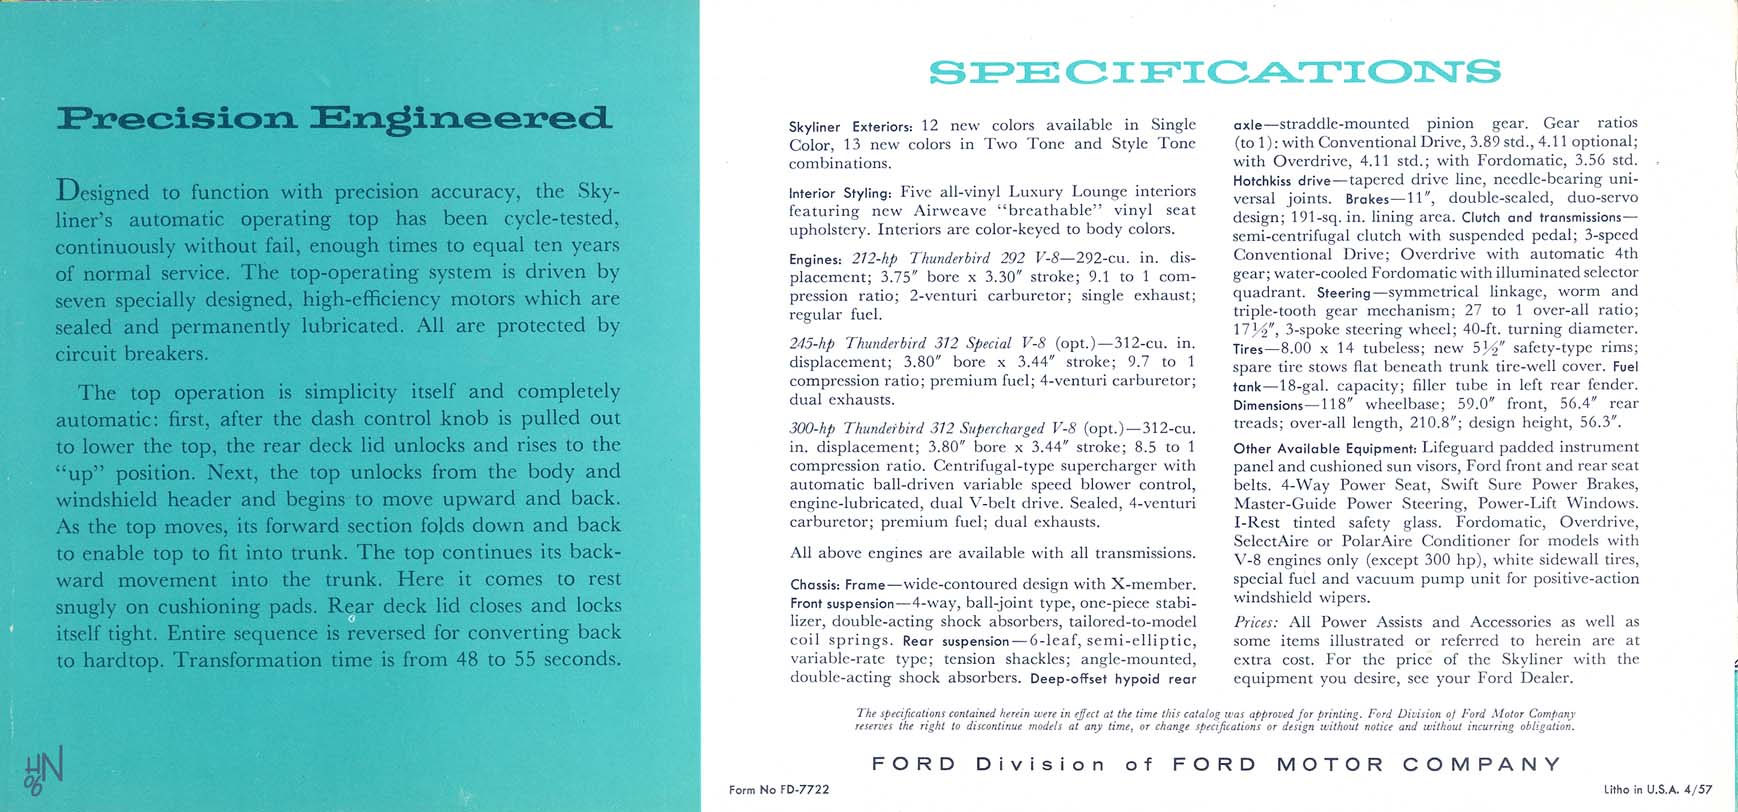 1957 Ford Skyliner Brochure Page 1